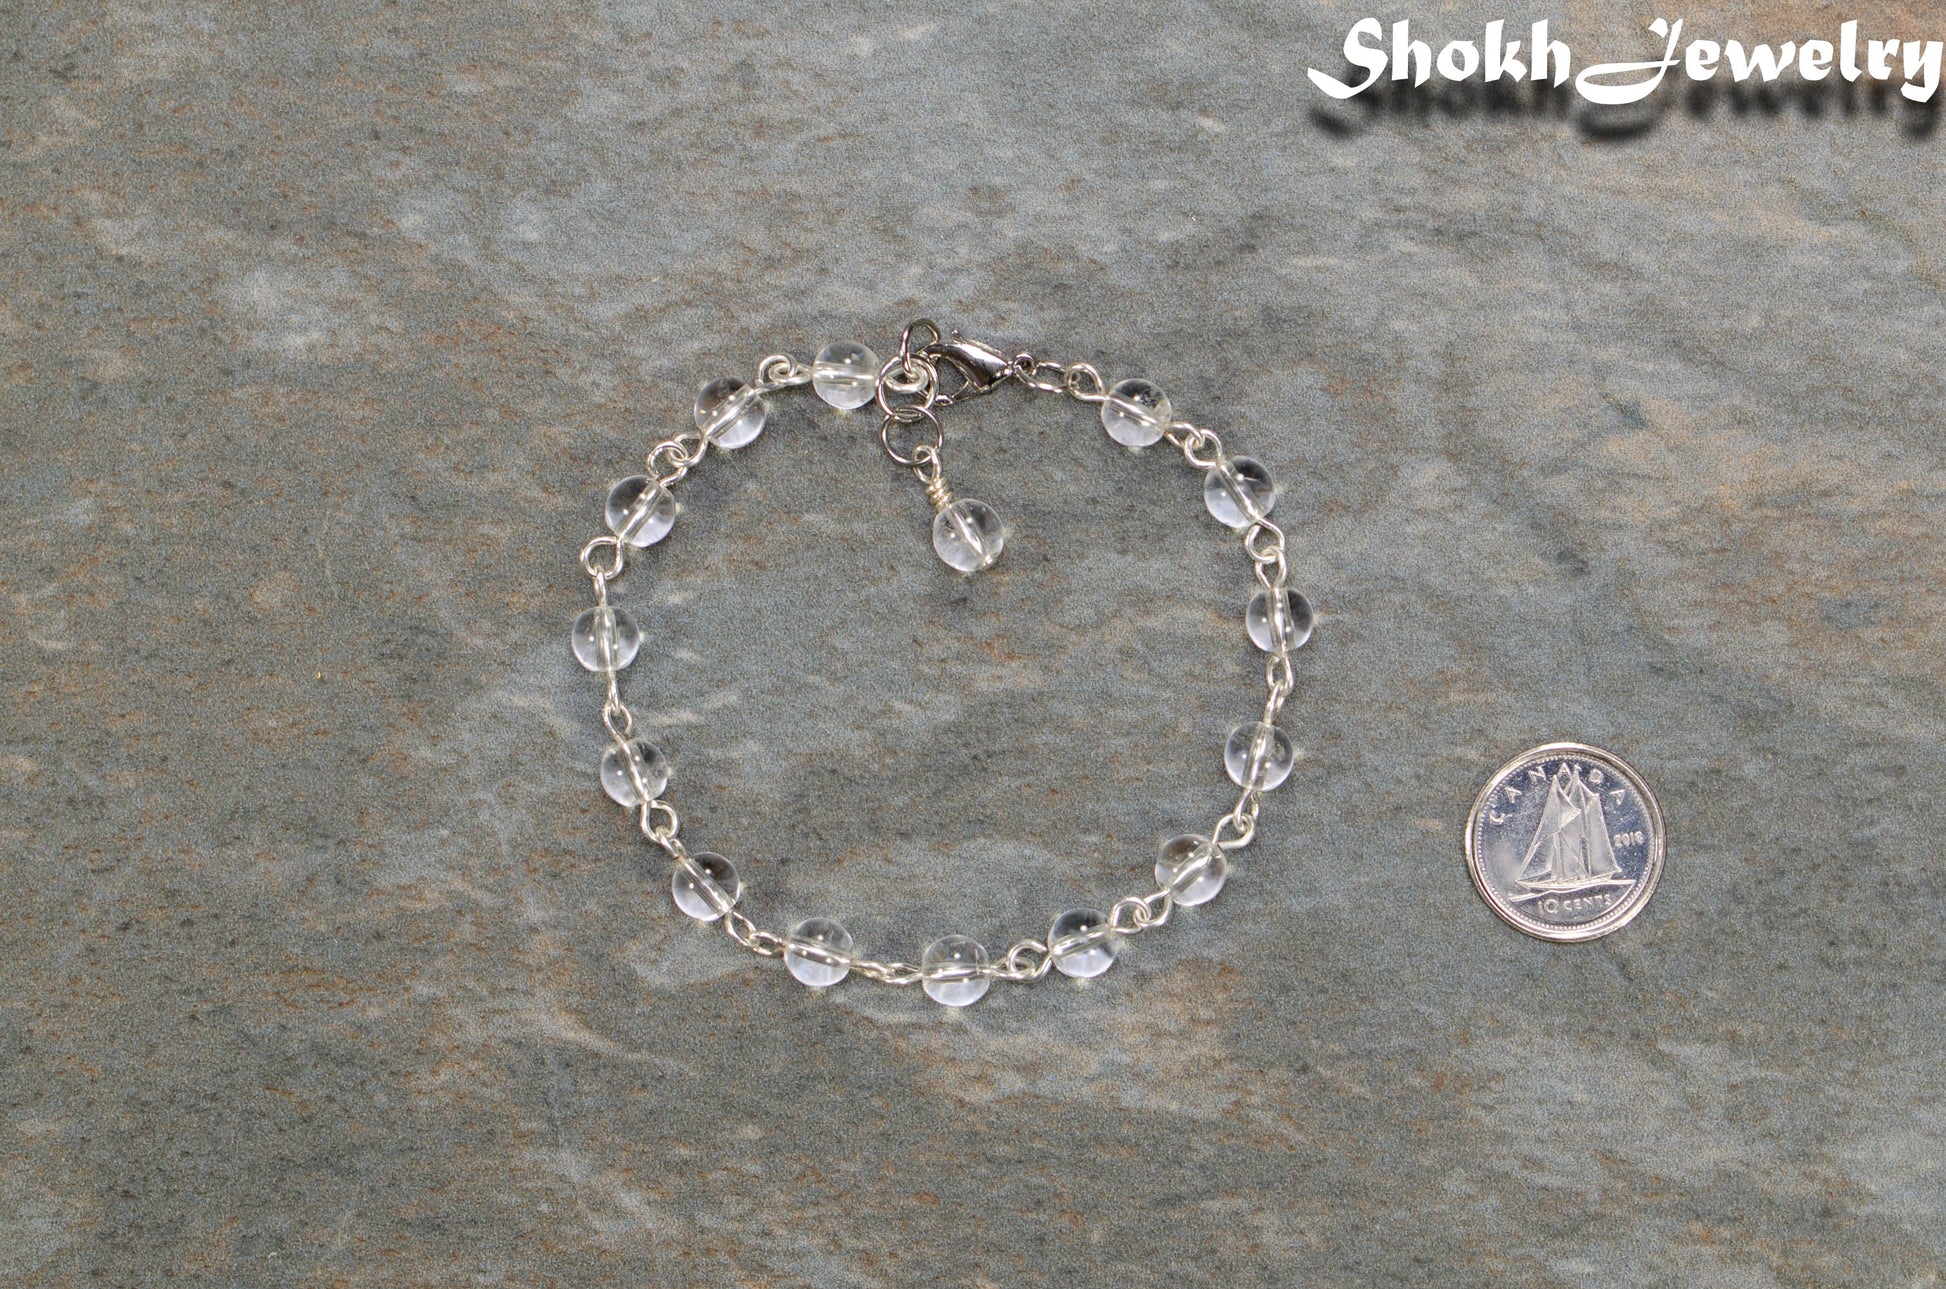 Handmade Clear Quartz Link Chain Anklet for Women beside a dime.